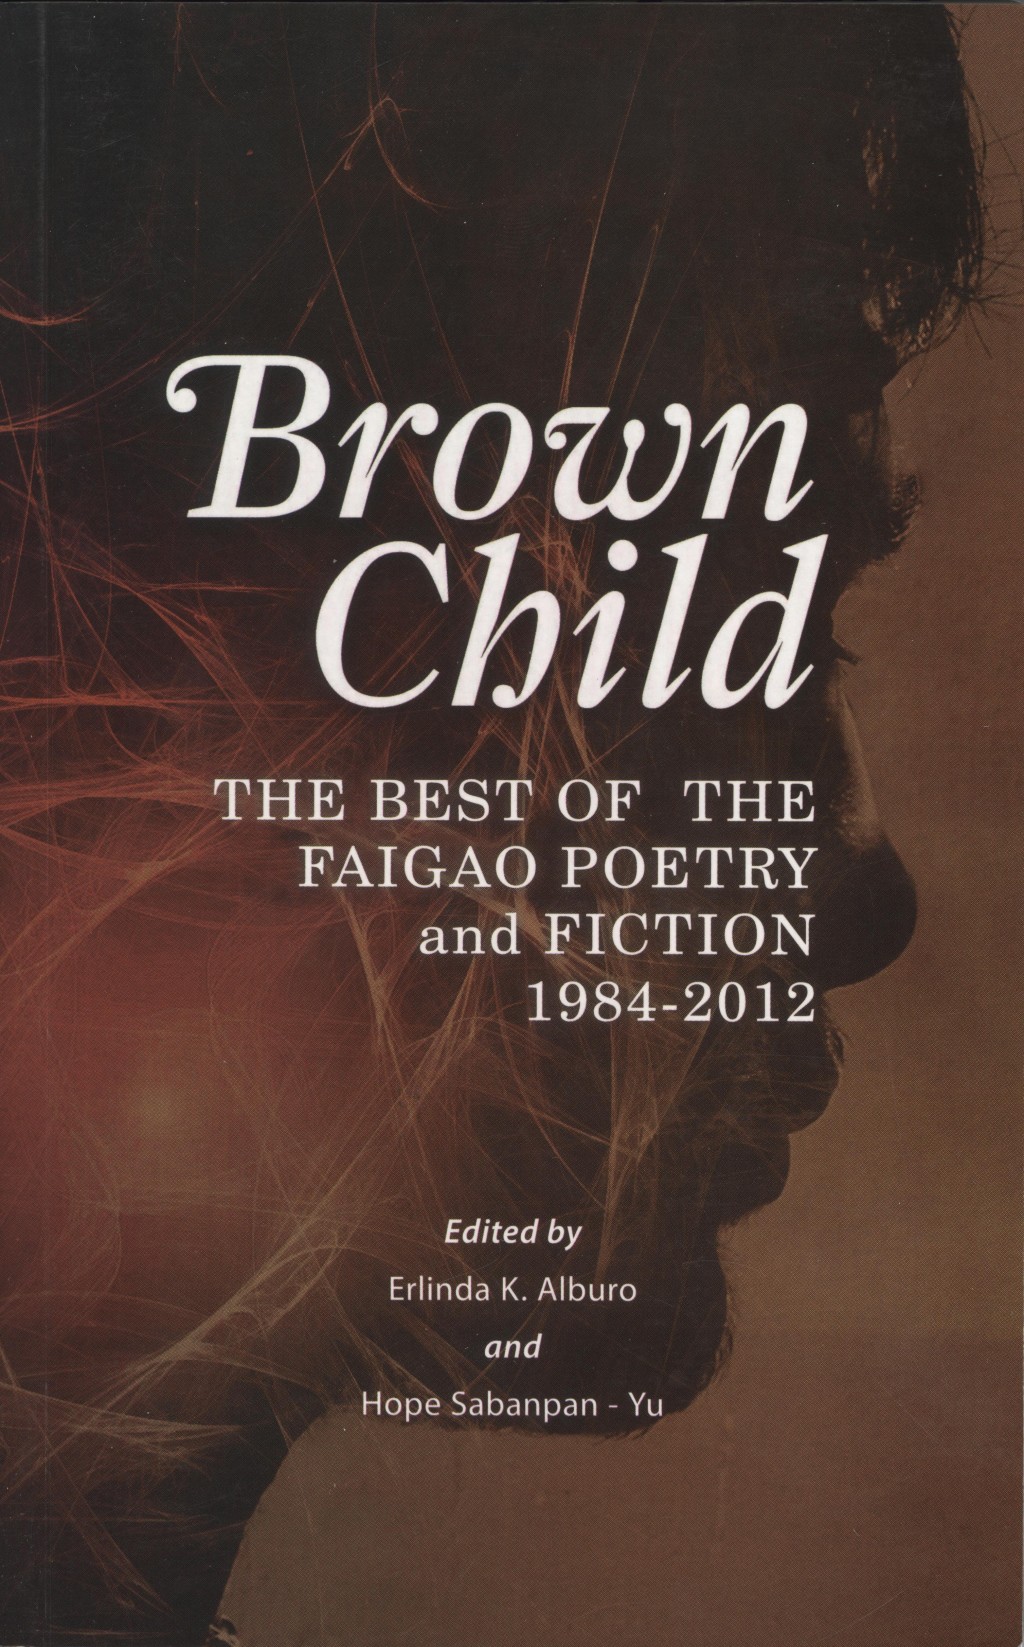 Brown Child: The Best of the Faigao Poetry and Fiction